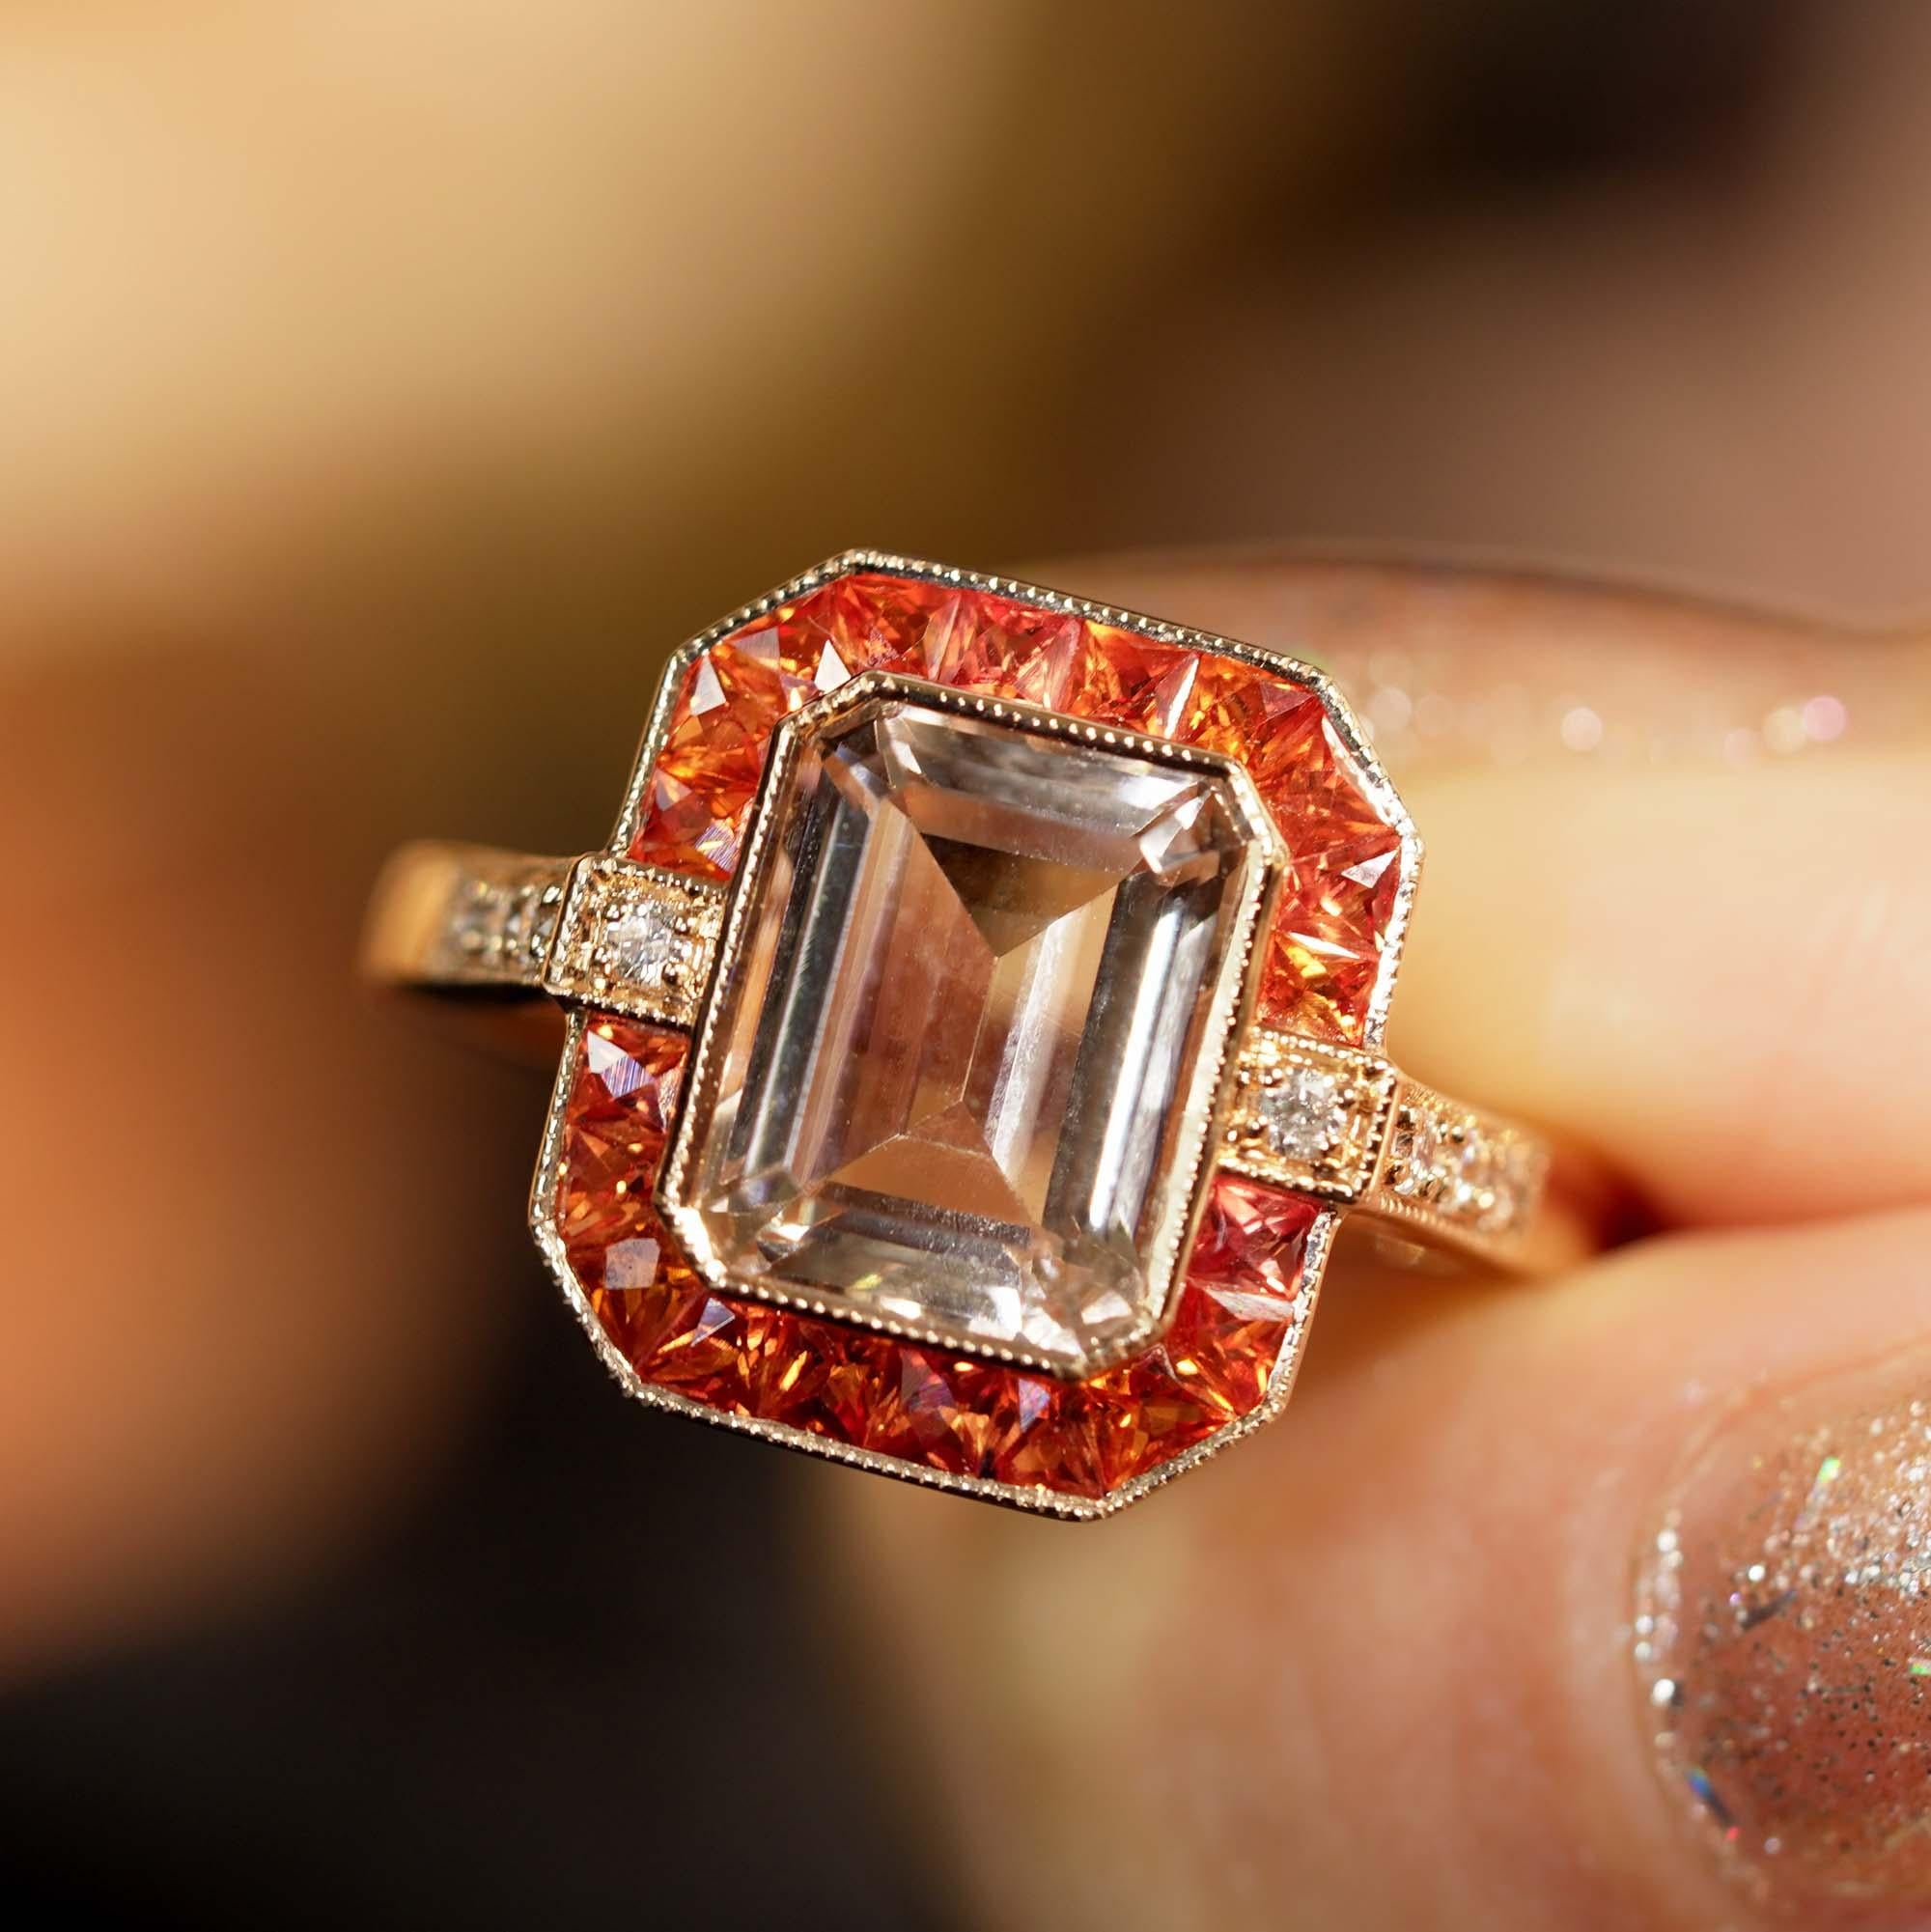 A striking and intriguing jewel, indeed. This bold and colorful Art Deco style ring highlights a gorgeous gleaming emerald cut 2.25 carat morganite framed in eye-catching color by French cut orange sapphires. Each side and shoulders set off with